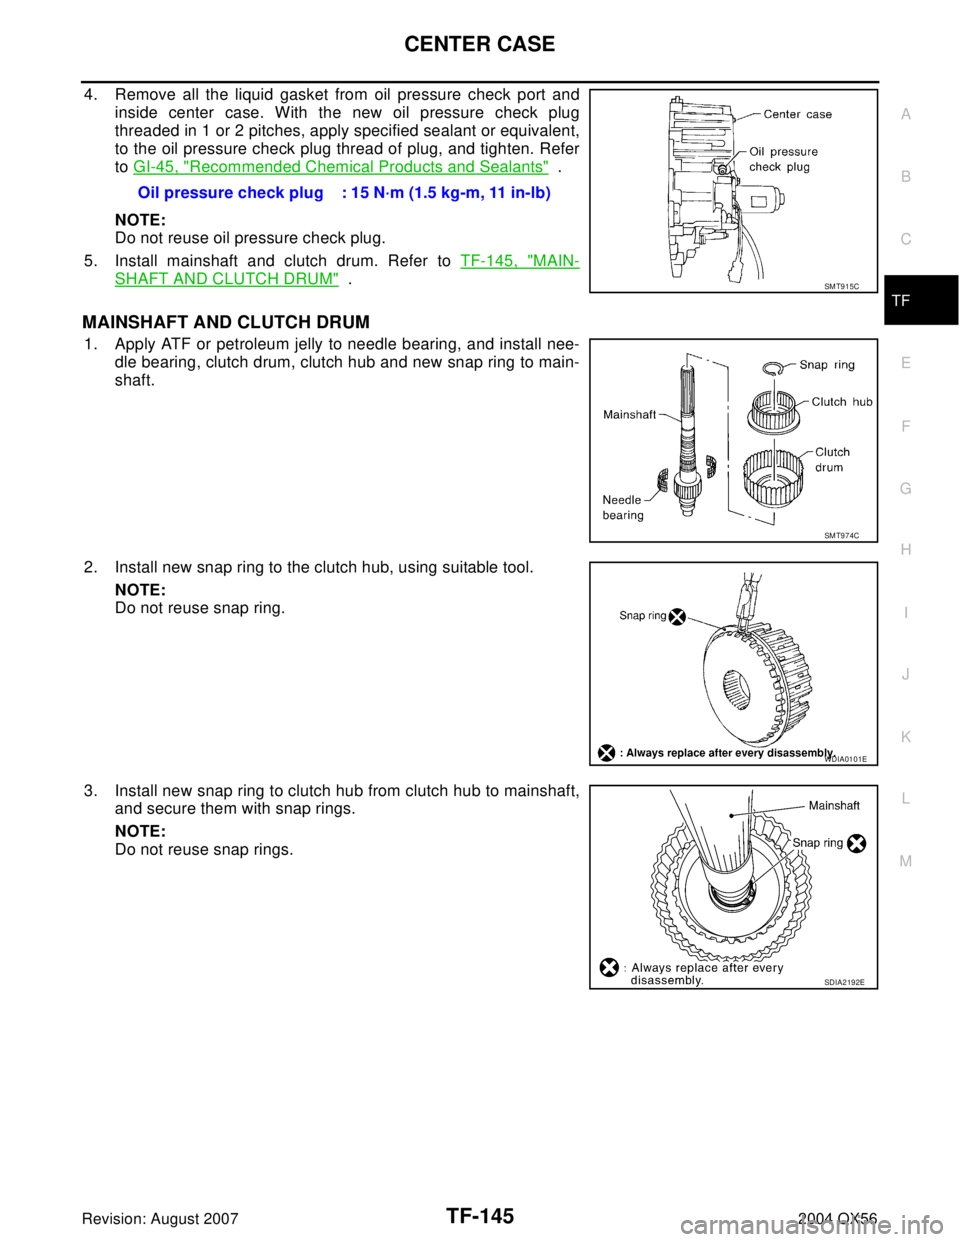 INFINITI QX56 2004  Factory Service Manual CENTER CASE
TF-145
C
E
F
G
H
I
J
K
L
MA
B
TF
Revision: August 20072004 QX56
4. Remove all the liquid gasket from oil pressure check port and
inside center case. With the new oil pressure check plug
th